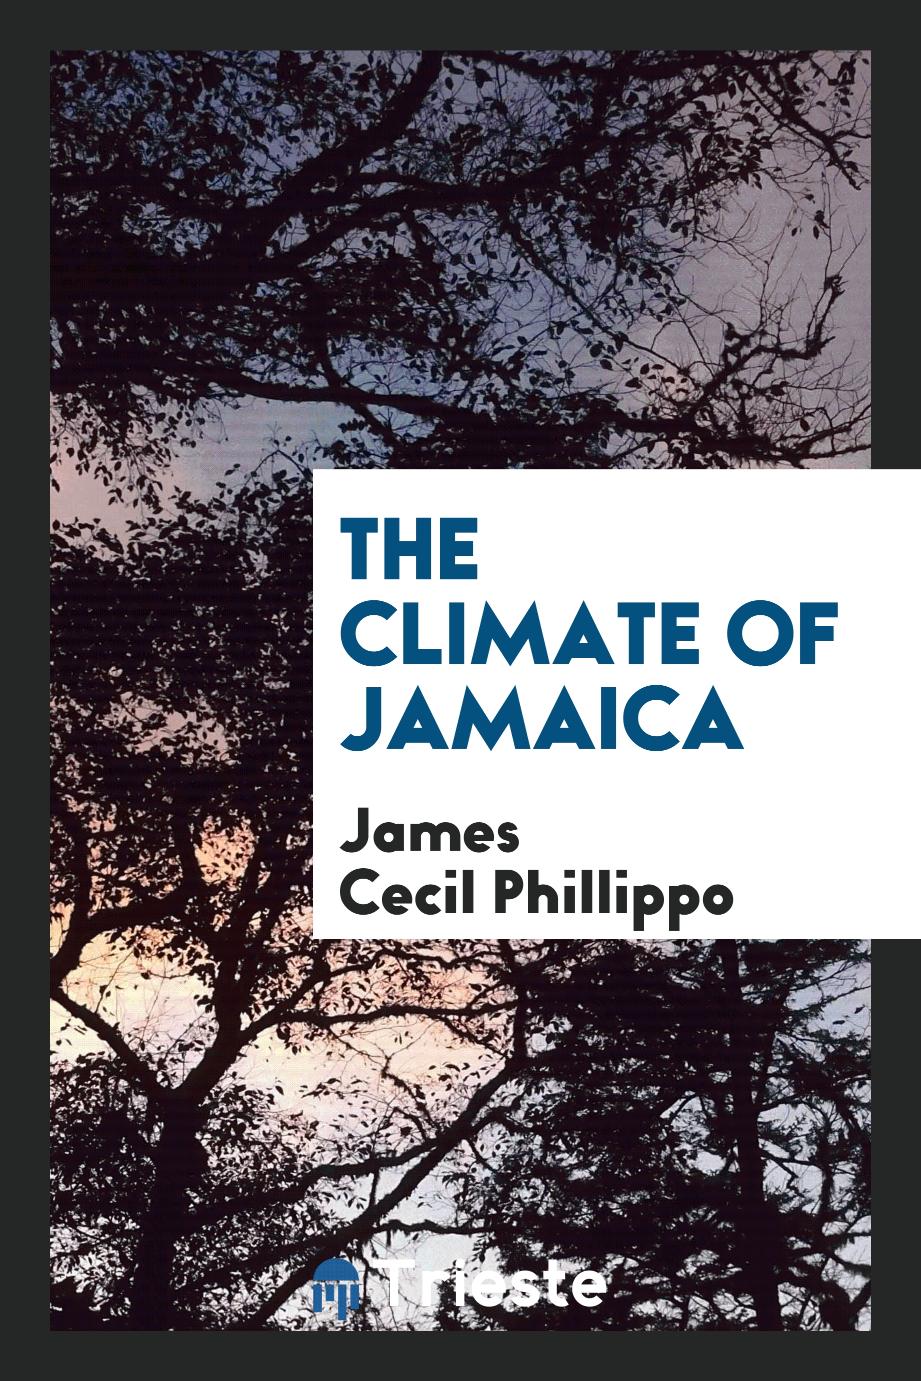 The climate of Jamaica